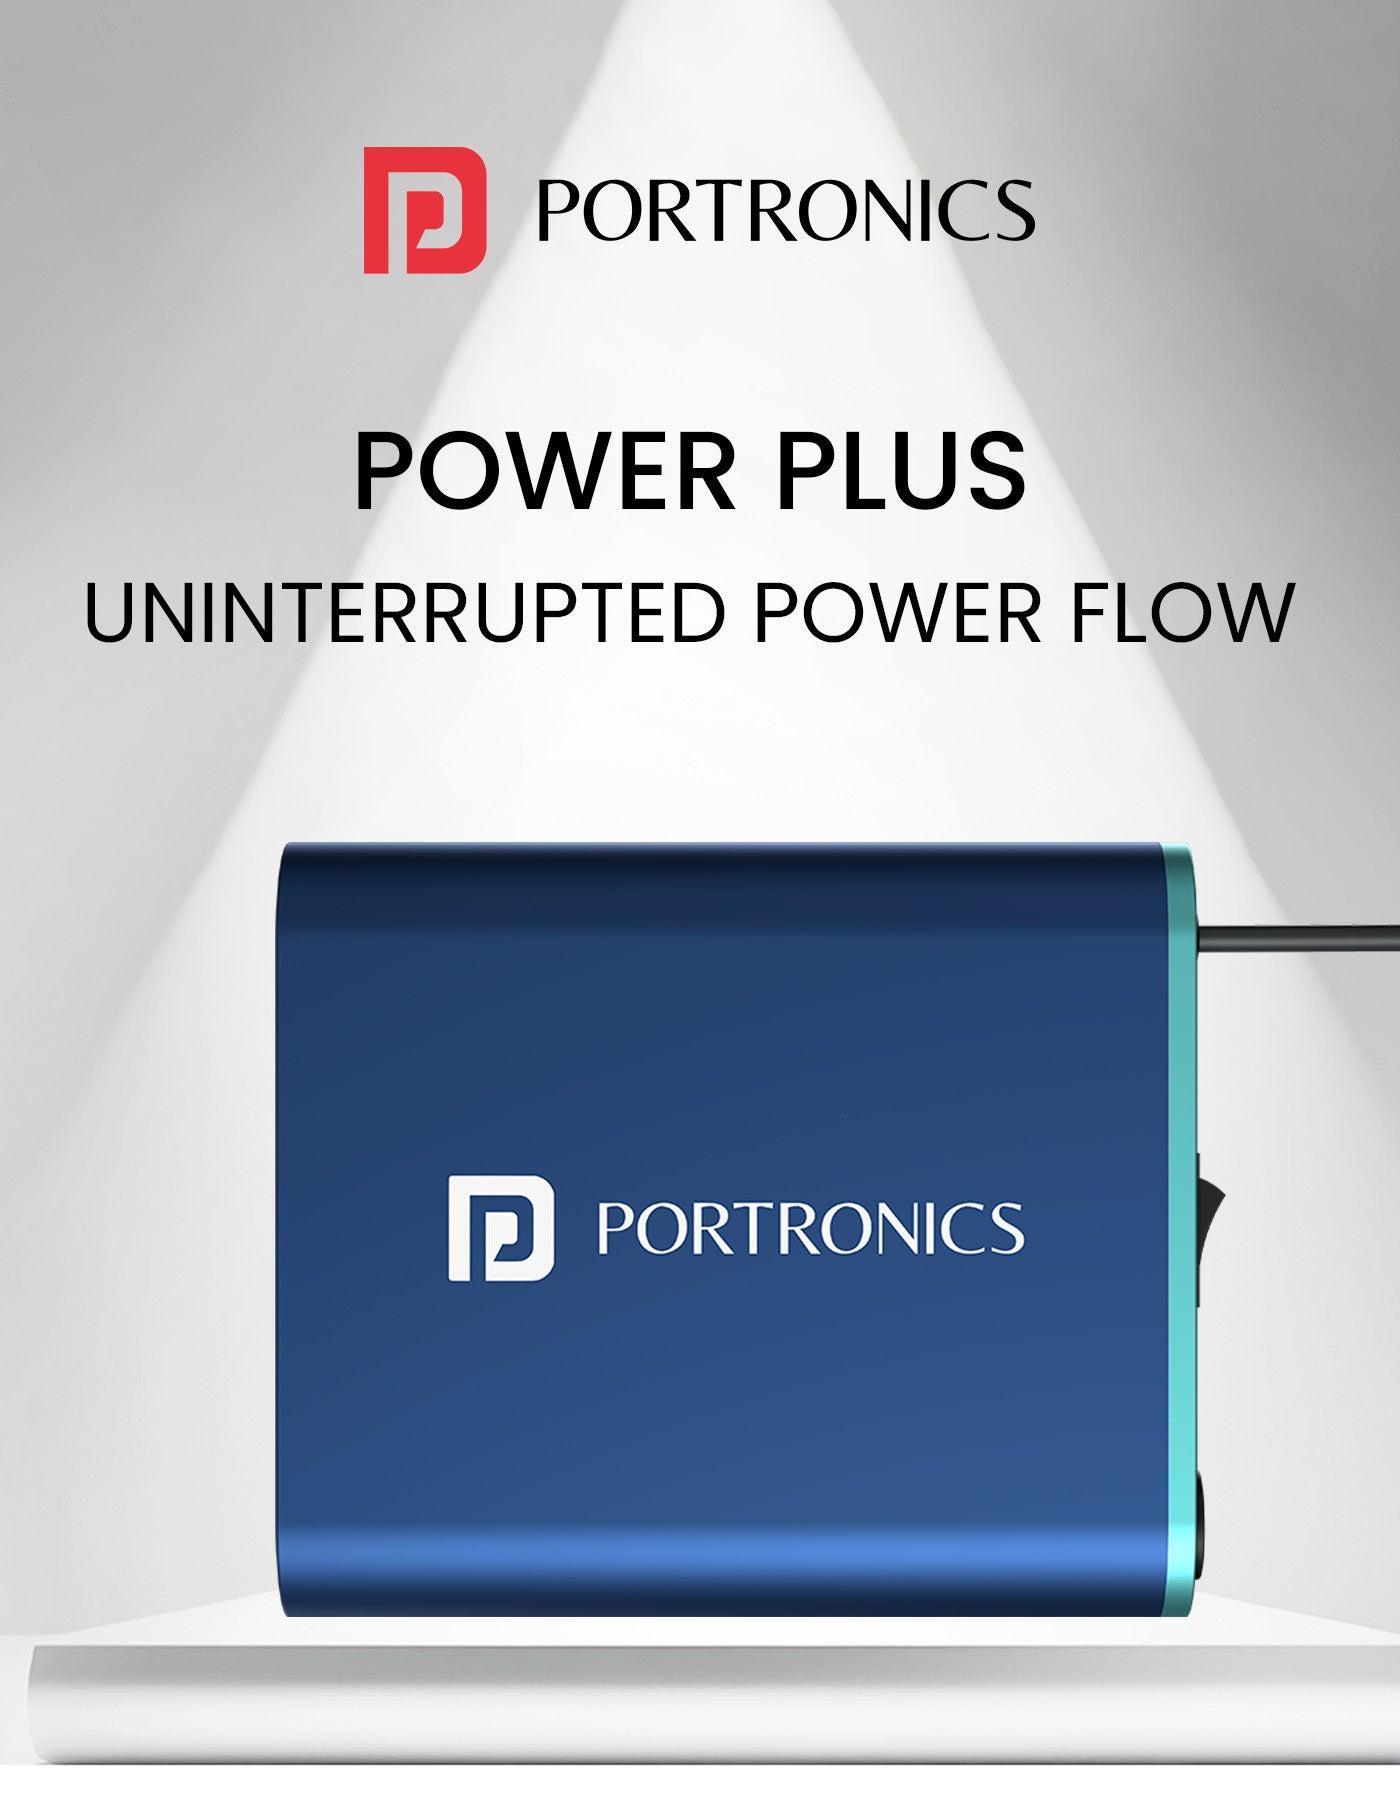 Portronics POWER PLUS 2000mah extended power bank for WiFi router| 12v mini ups support all types of 12v devices